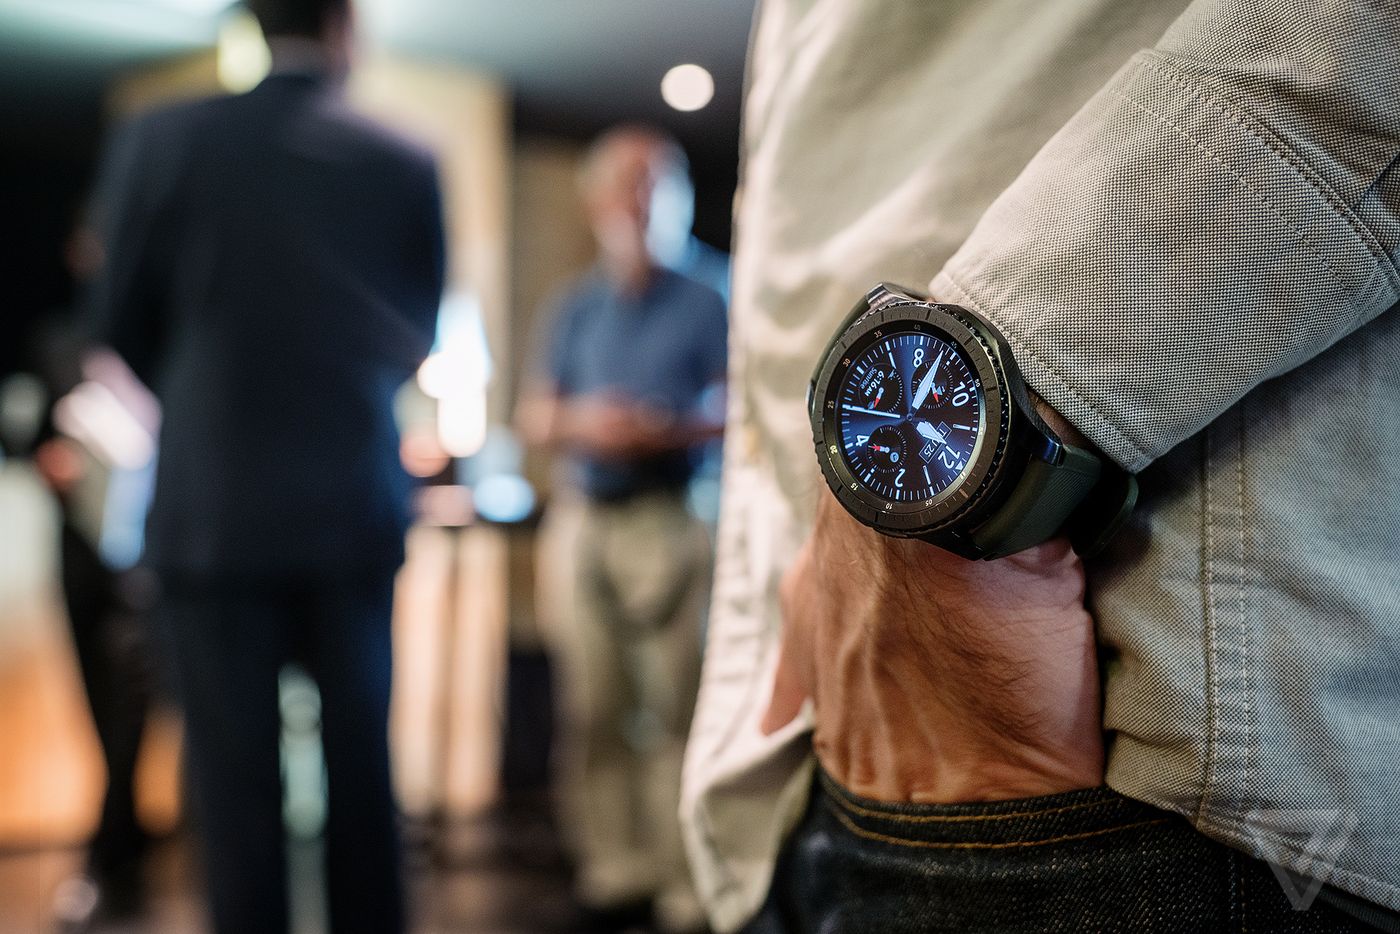 Samsung Unveils Gear S3 Smart Watch With GPS and LTE